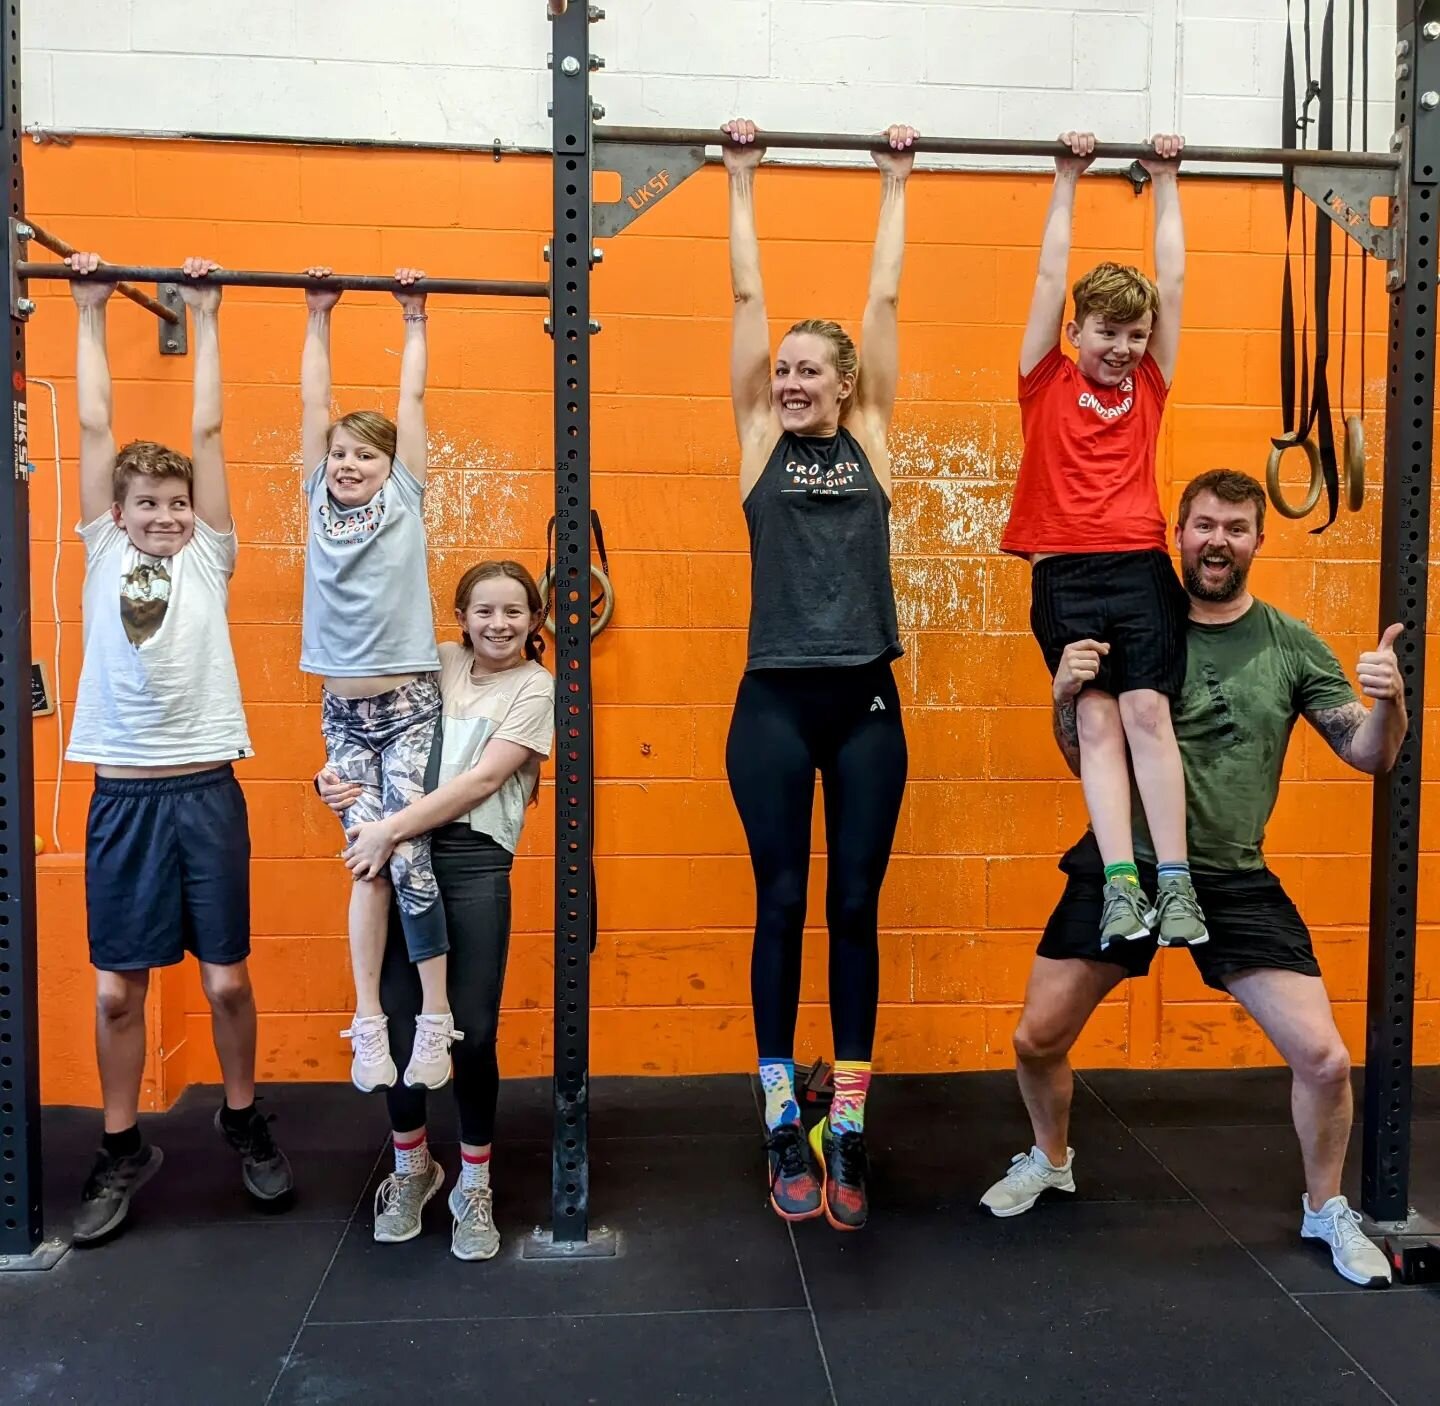 Family fitness 💪 
Adults Vs Kids 😎 
.
.
.
#crossfit #family #fitness #waterlooville